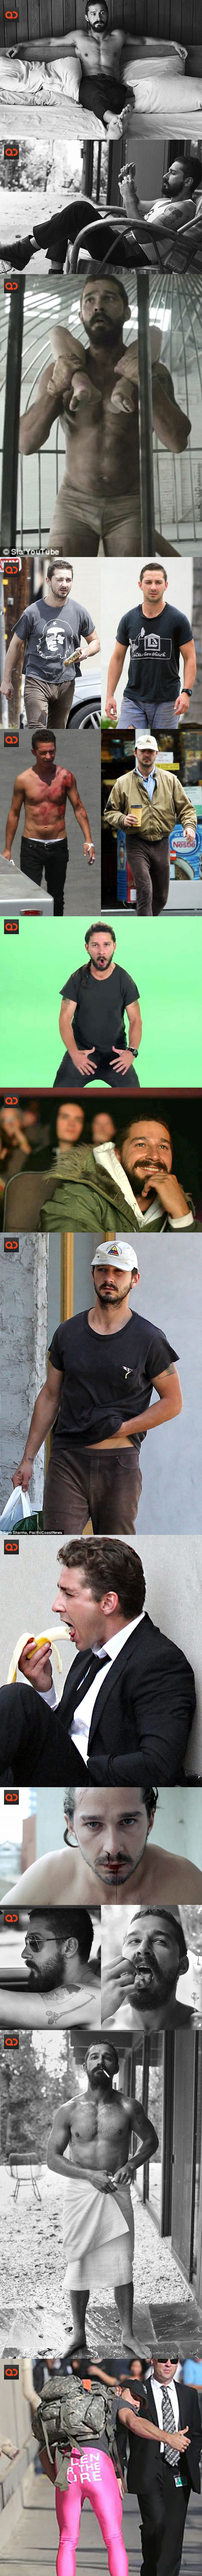 Shia LaBeouf, Caught Airing His Dick In Public - The Uncensored Photos Of The Transformers Actor Peeing Finally Surface!